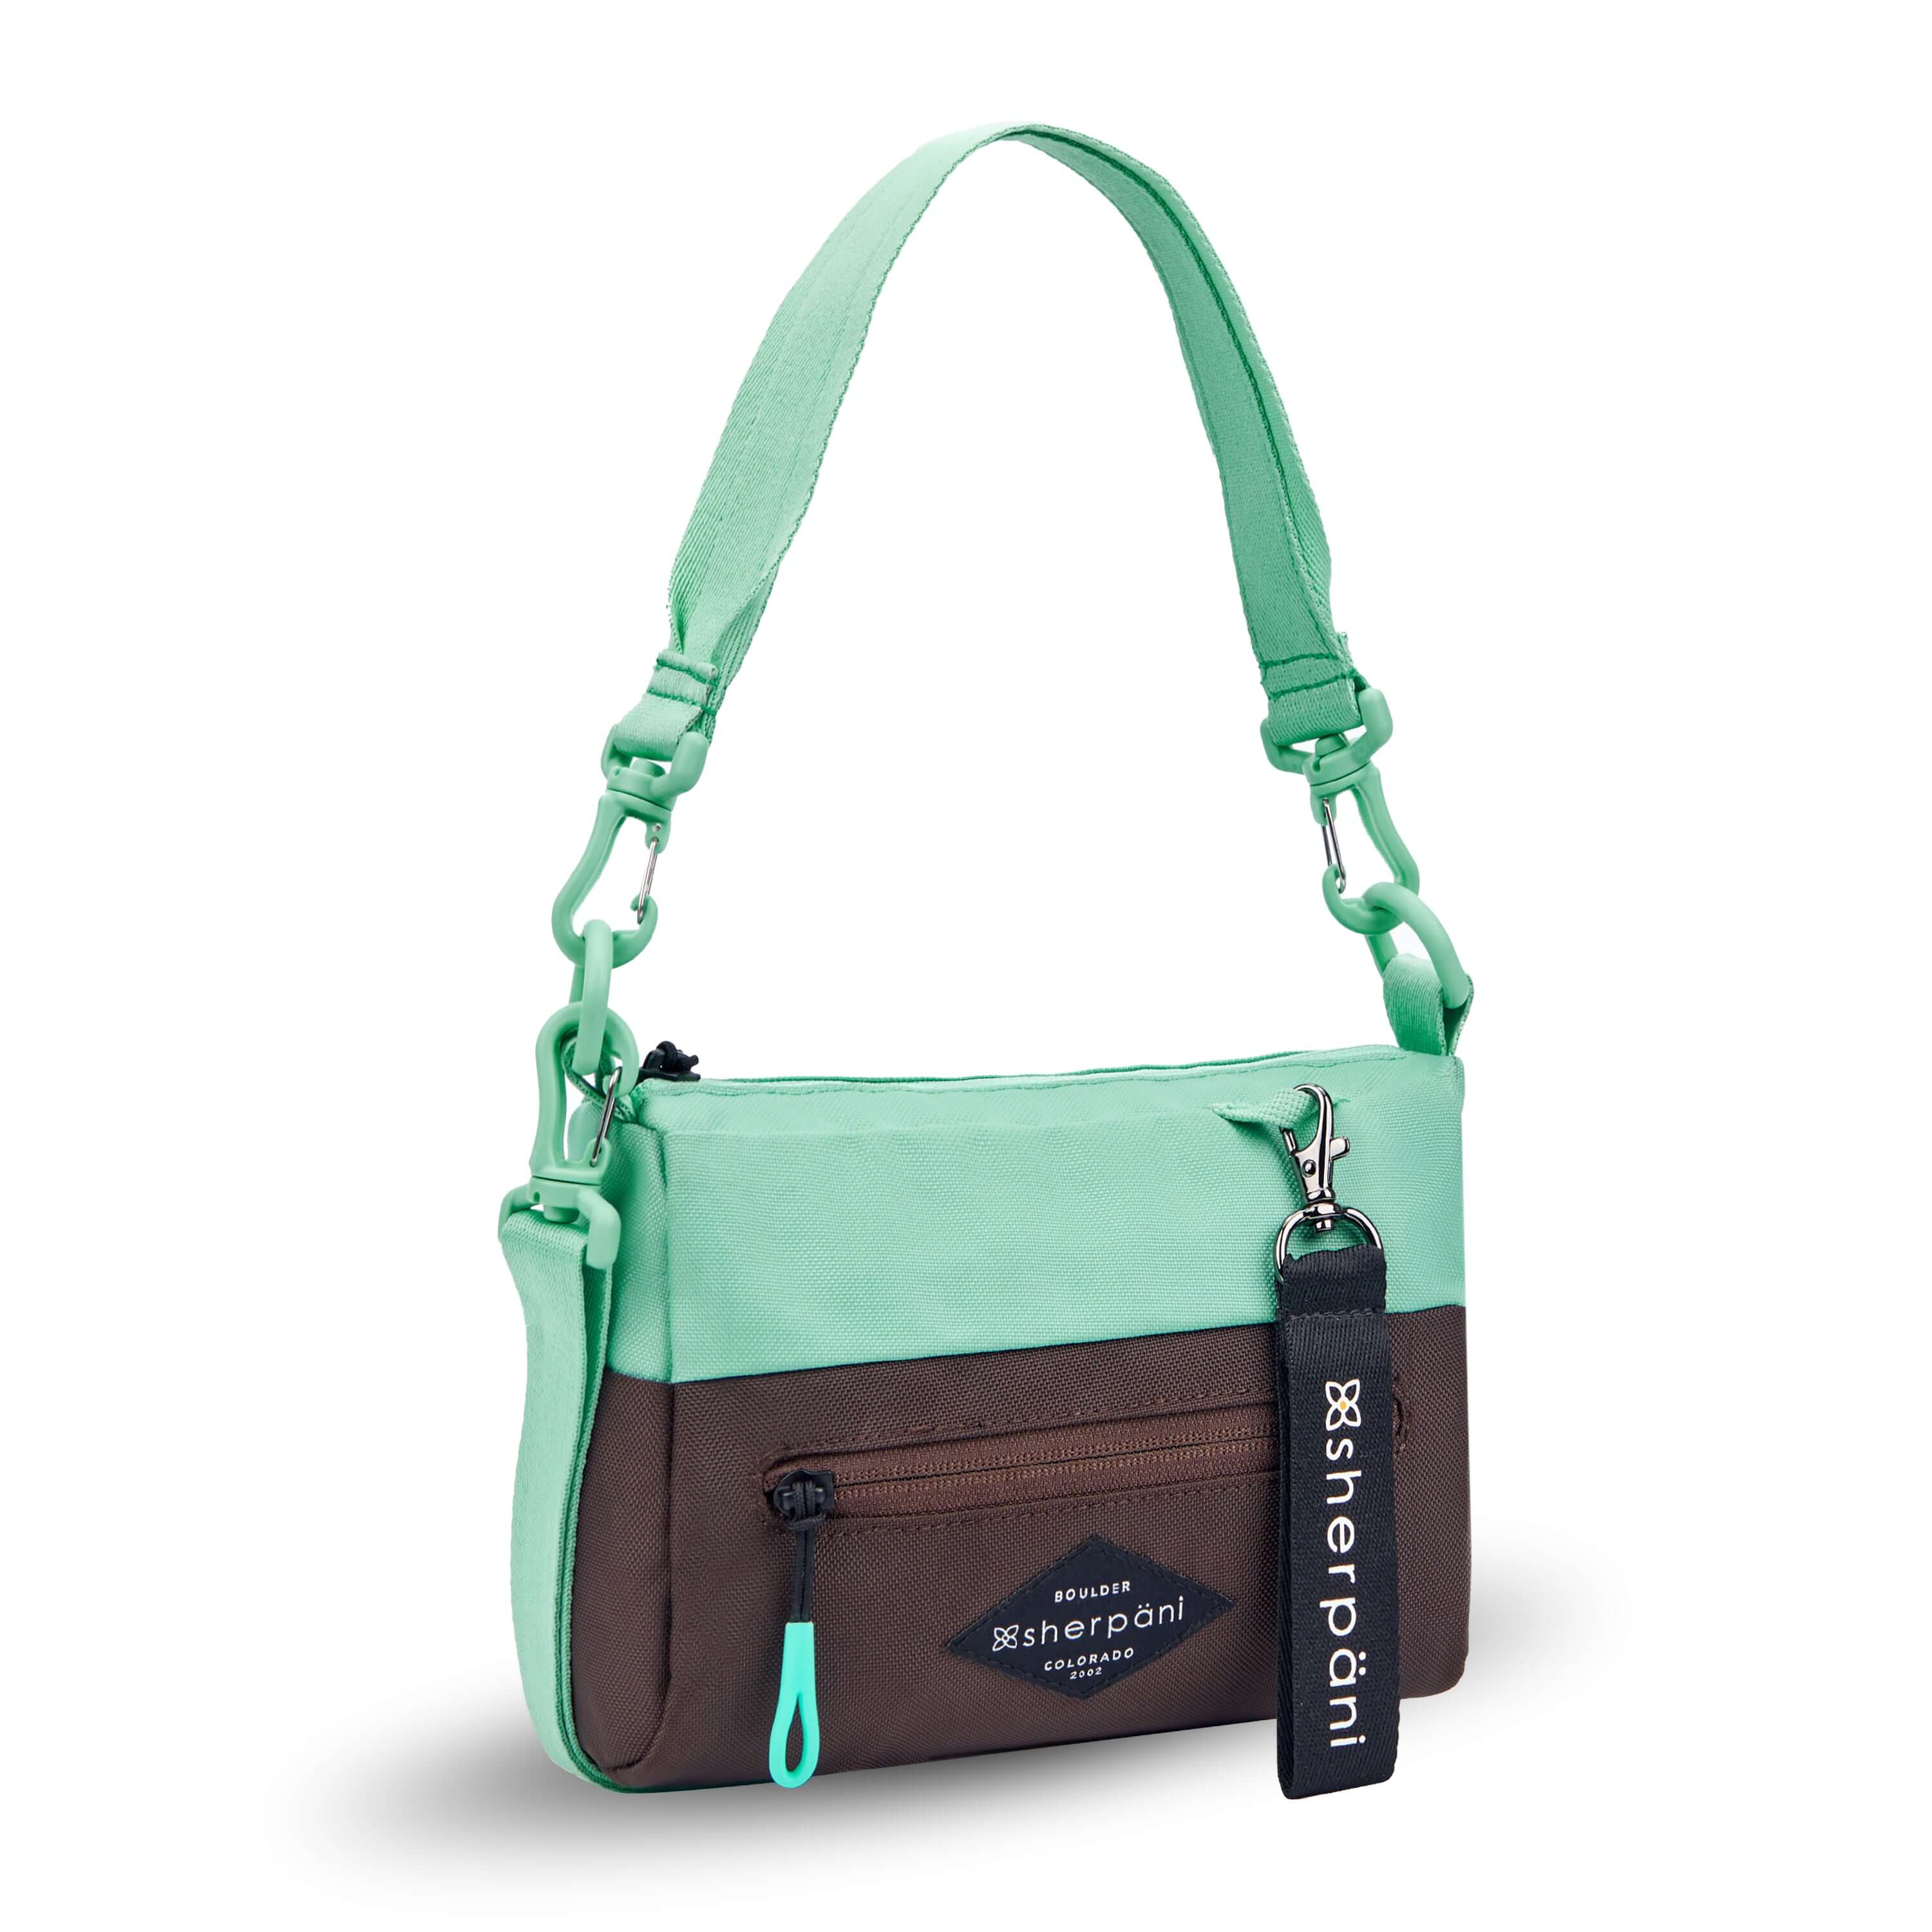 Angled front view of Sherpani's purse, the Skye in Seagreen. It is two-toned, the top half of the bag is light green and the bottom half of the bag is brown. There is an external zipper compartment with an easy-pull zipper accented in light green. There is a branded Sherpani keychain clipped to the upper right corner. The bag has a detachable short strap and a longer detachable/adjustable crossbody strap. 